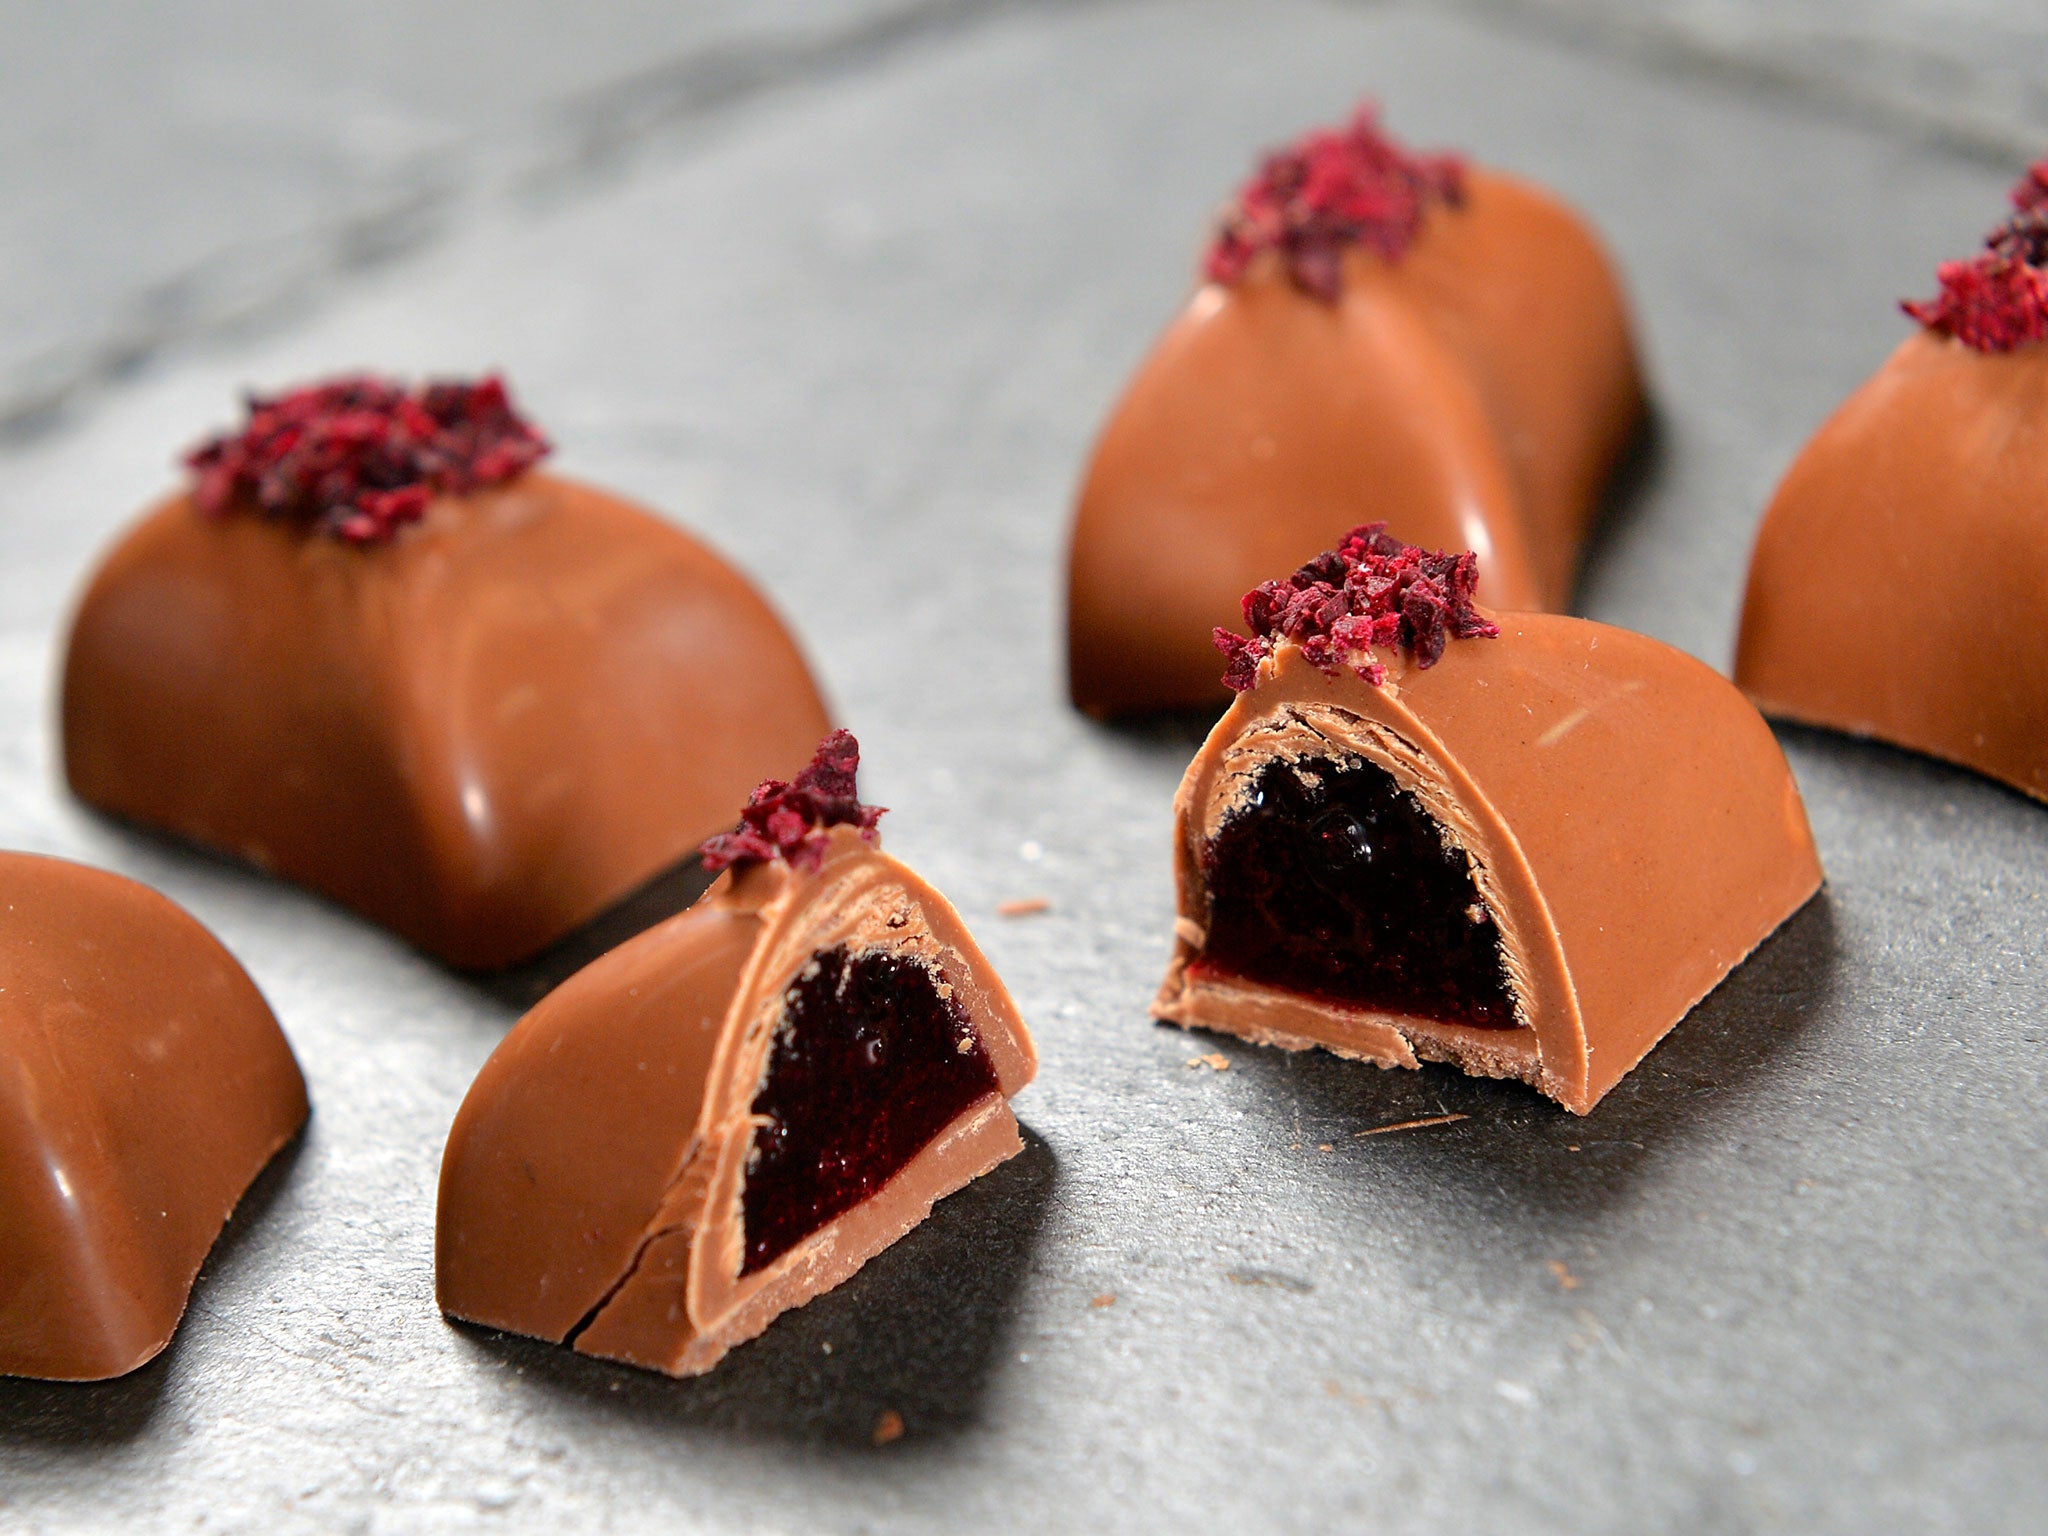 The Beetroot Jelly chocolate.